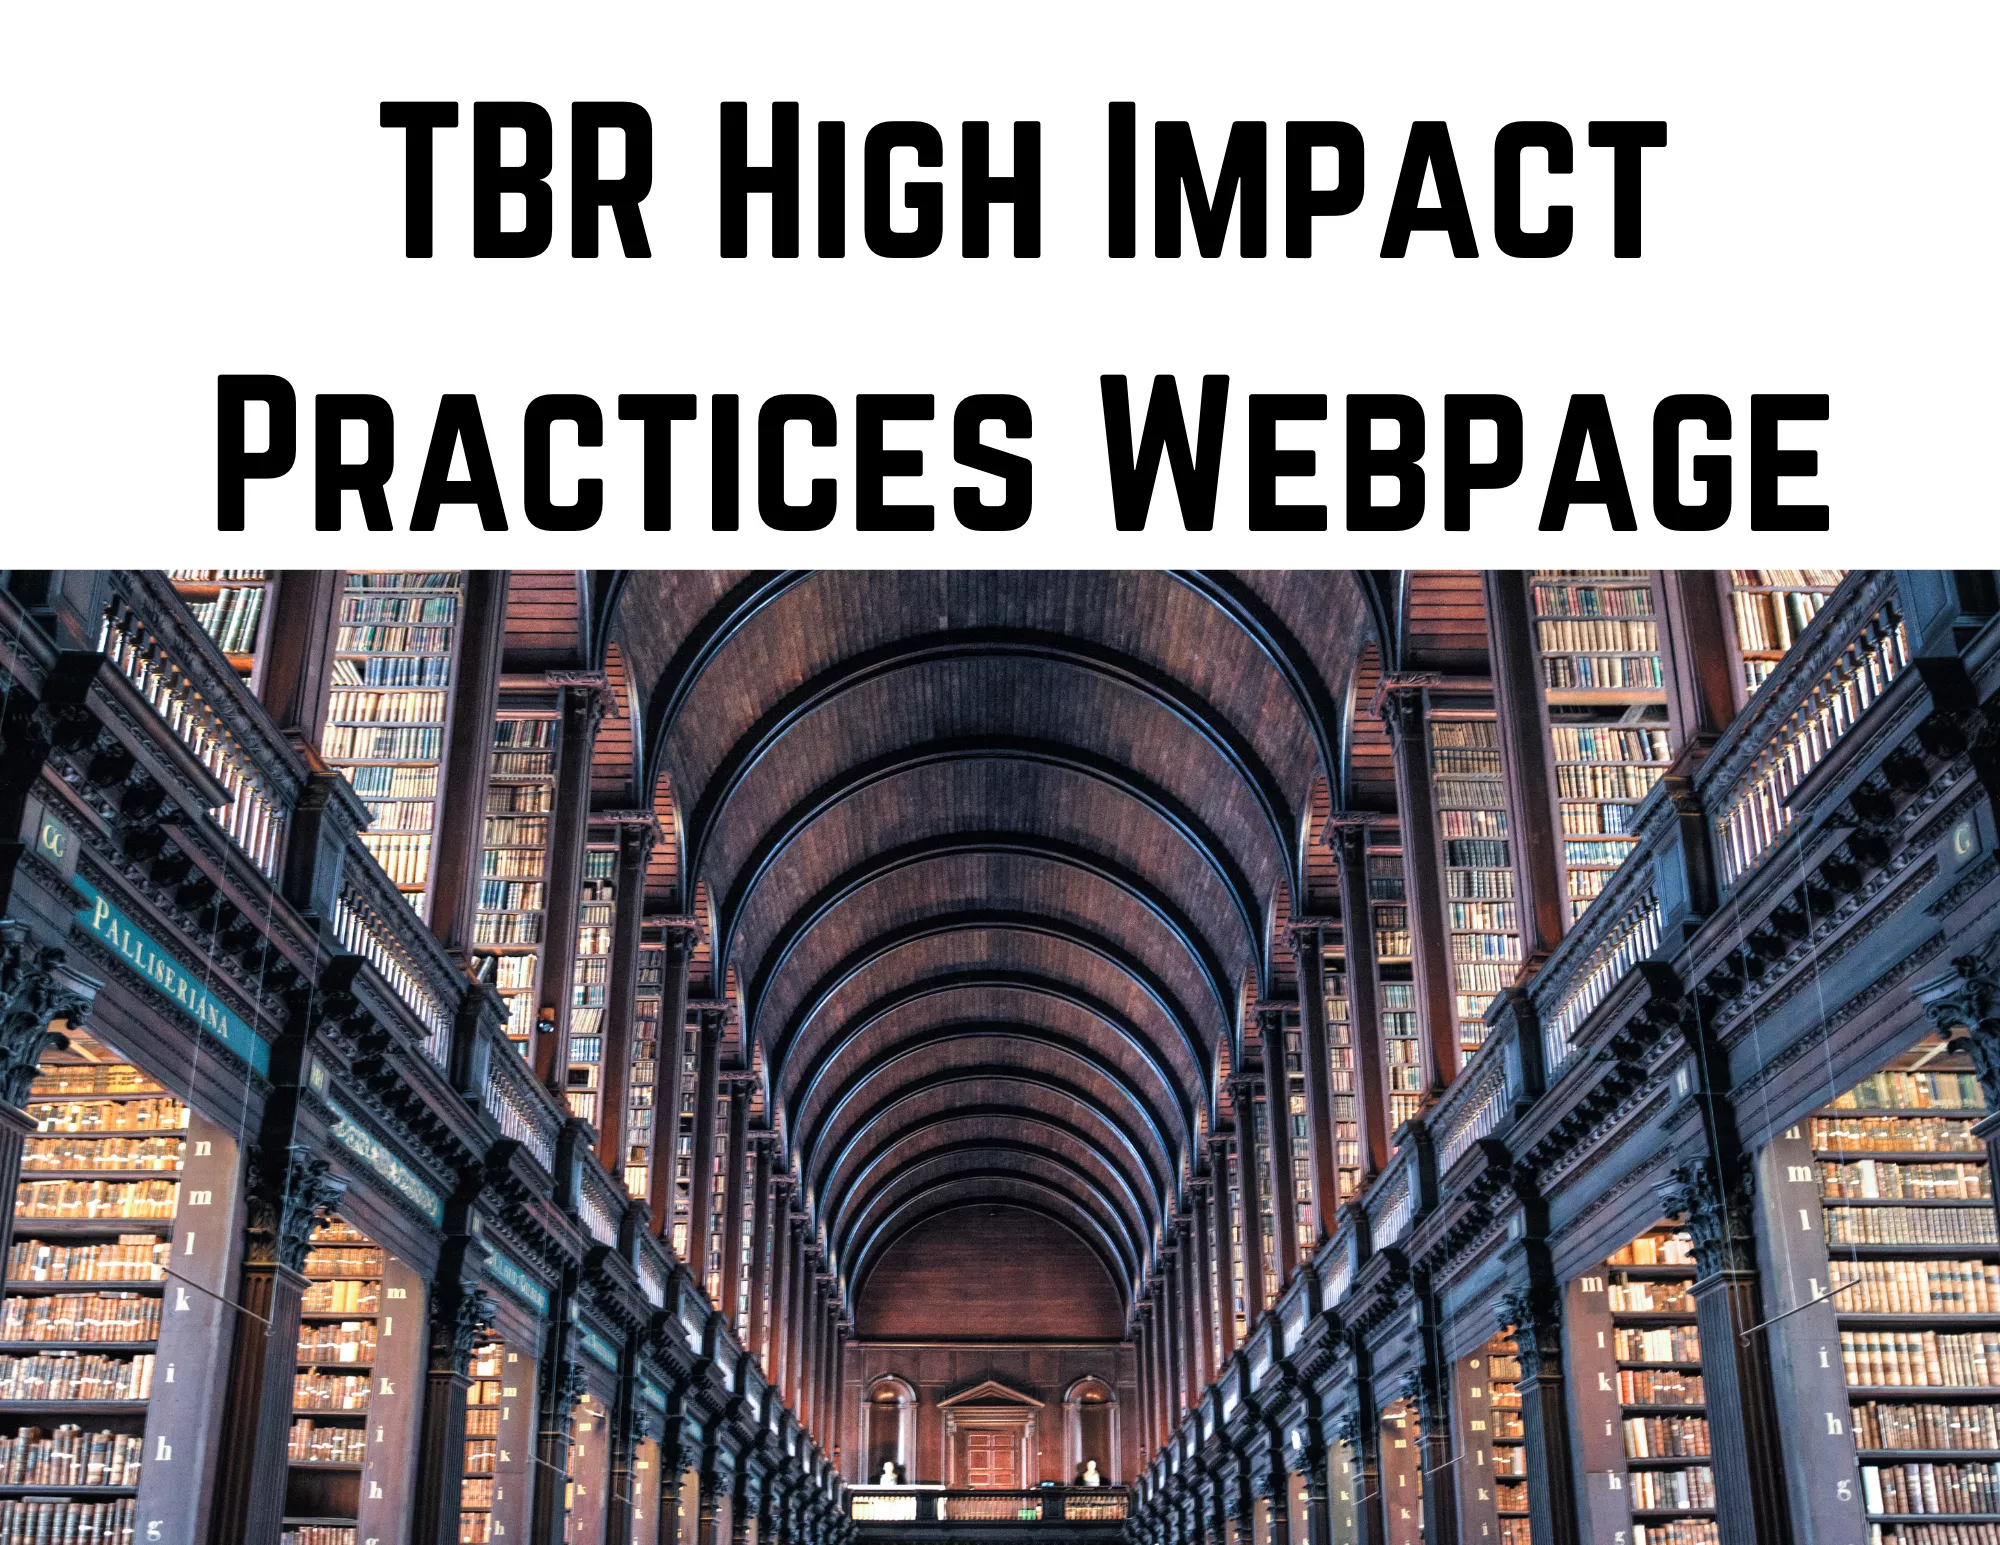 TBR High Impact Practices Webpage